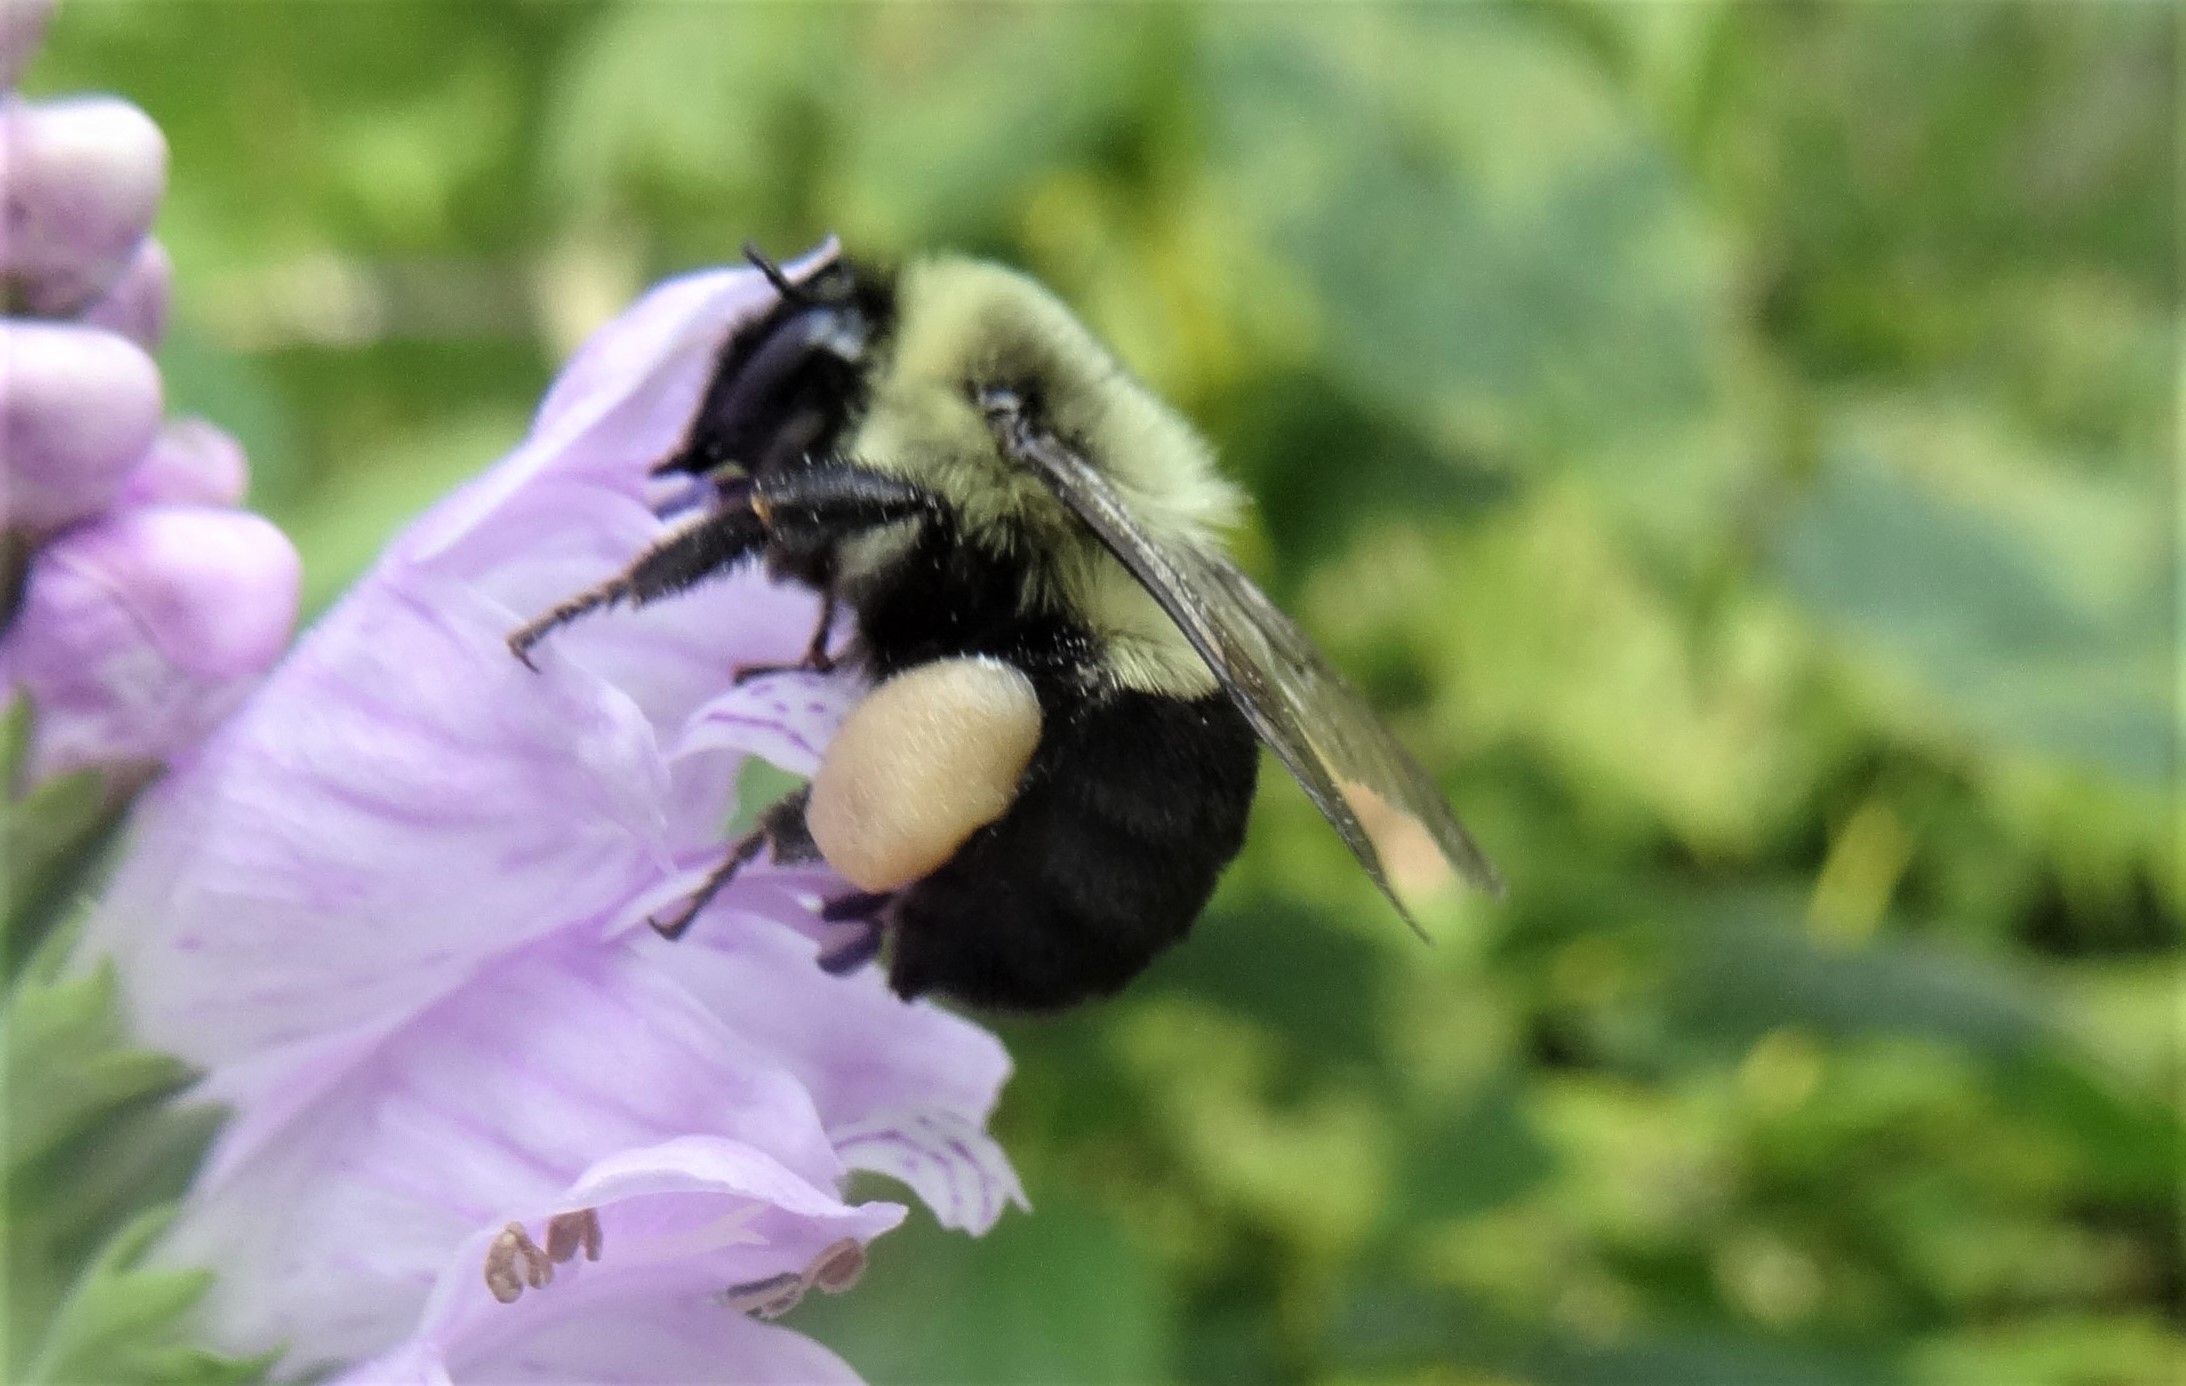 A bumblebee foraging on a purple flower